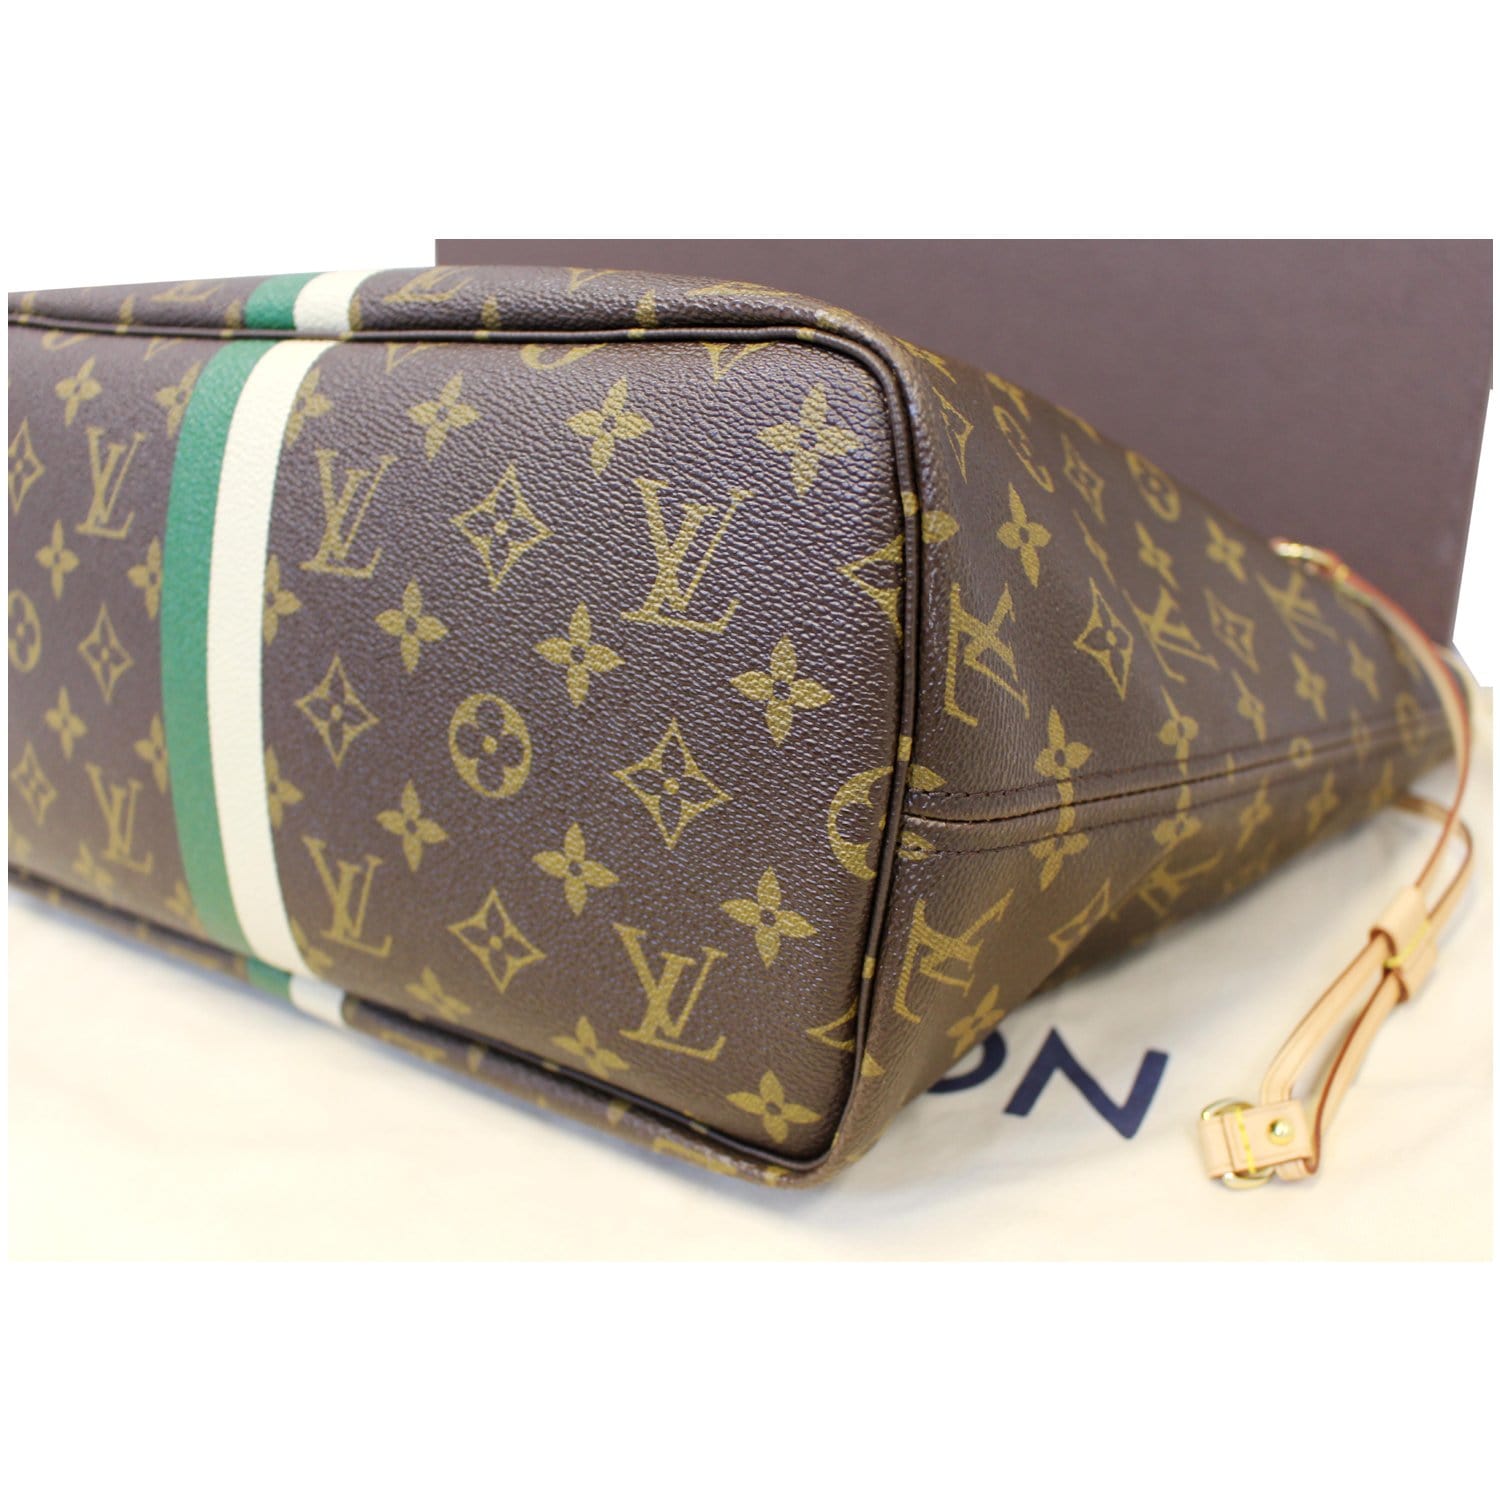 Authentic Louis Vuitton Mon Mono Neverfull tote 2018!!! for Sale in